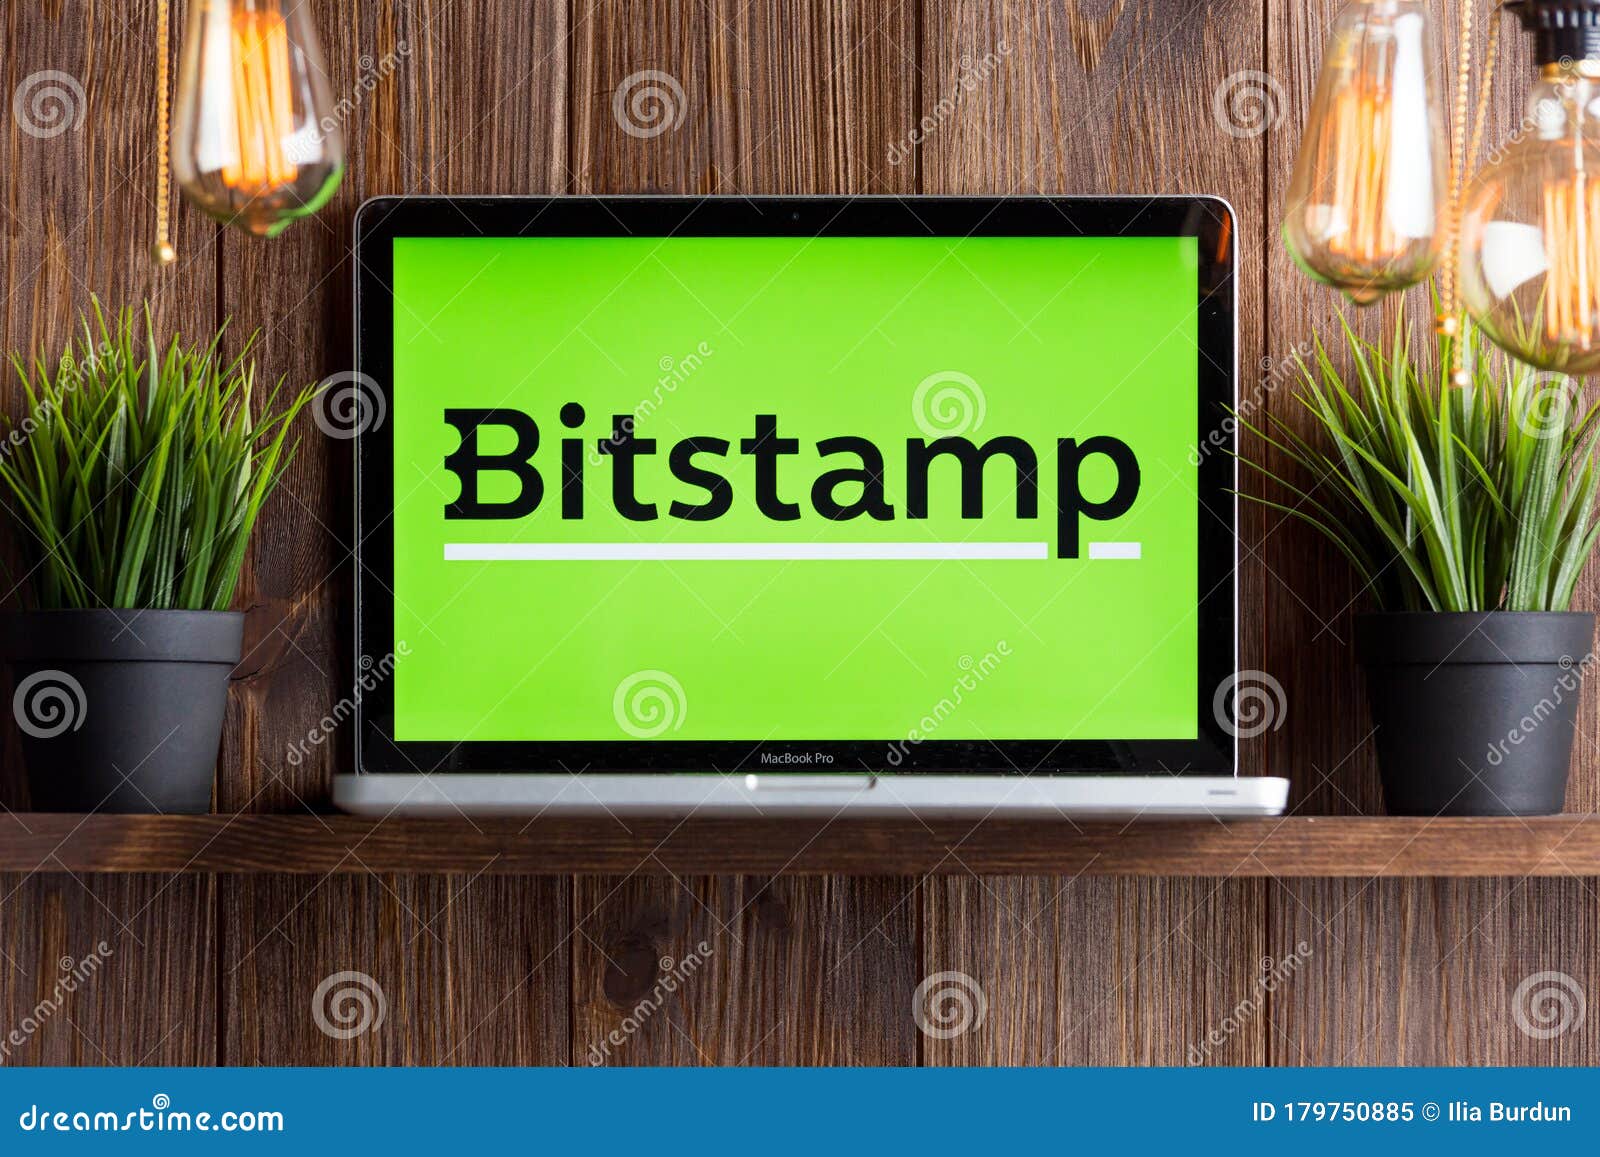 Tula Russia 16.01.20 Bitstamp On The Laptop Screen ...